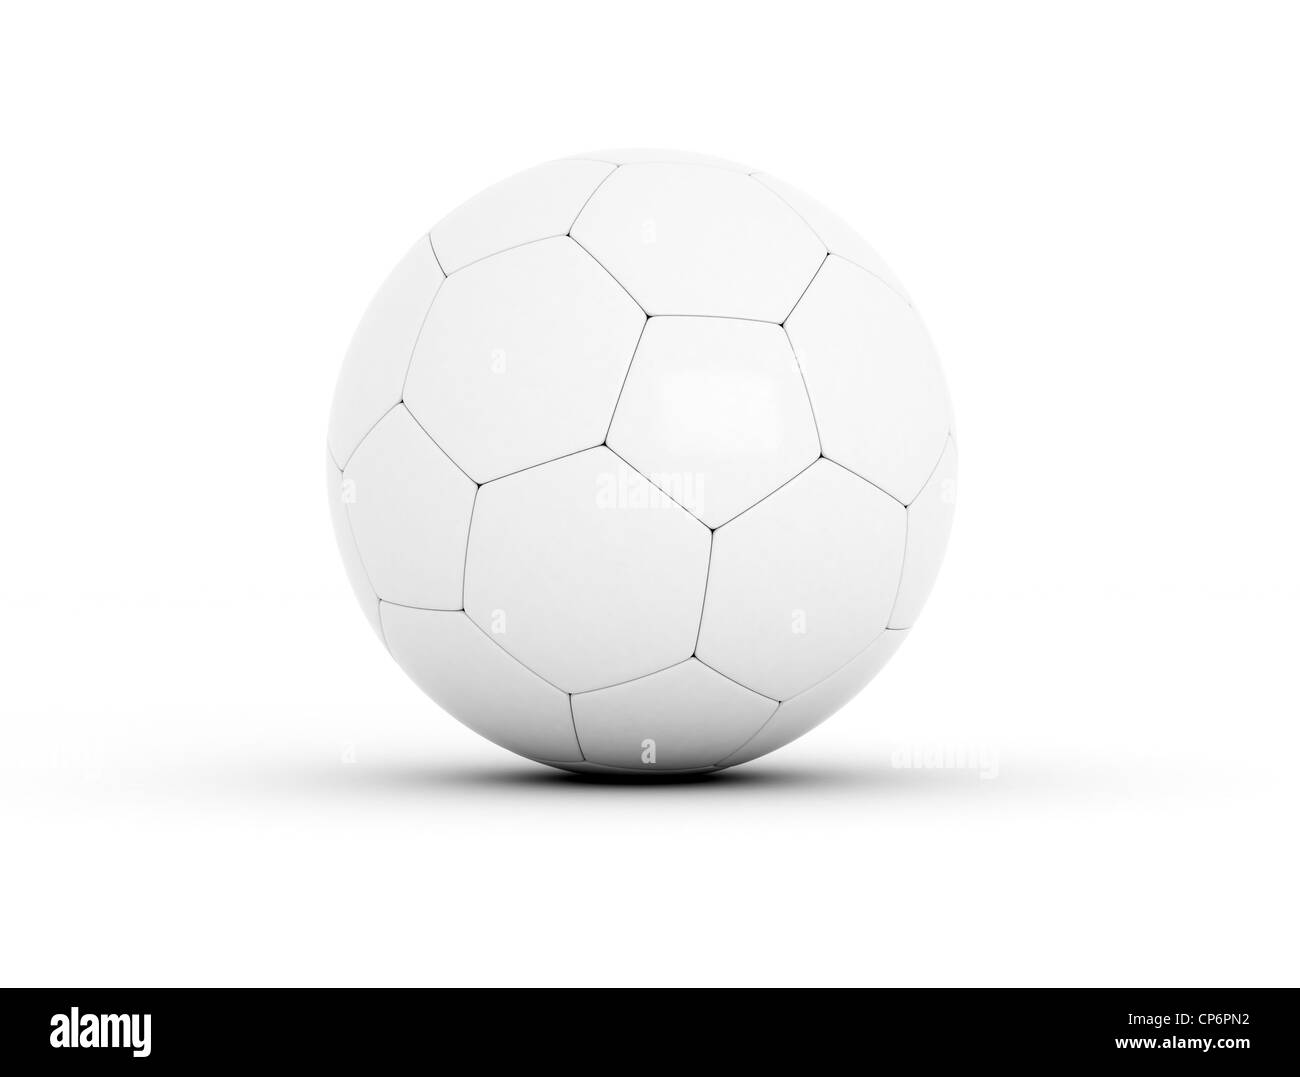 High resolution render of a soccer ball on white background. Stock Photo